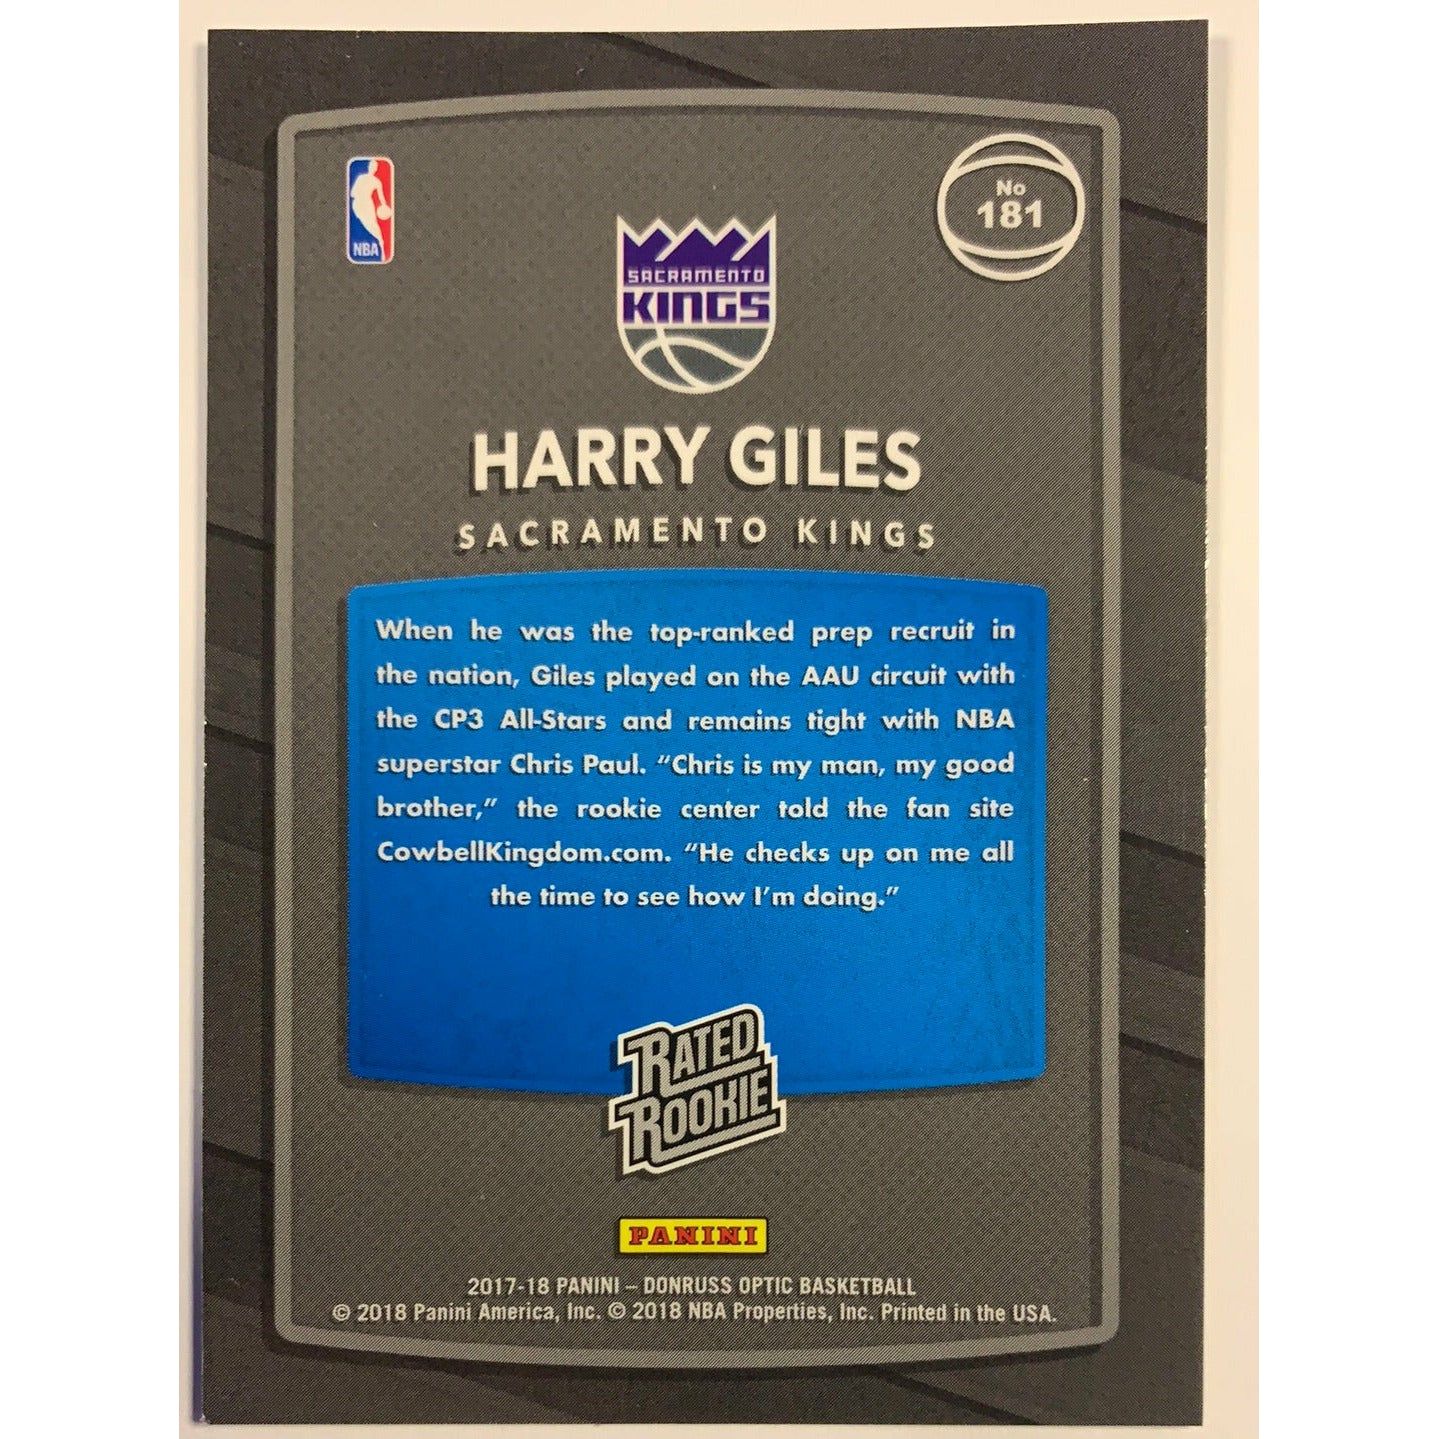  2017-18 Donruss Optic Harry Giles Rated Rookie  Local Legends Cards & Collectibles